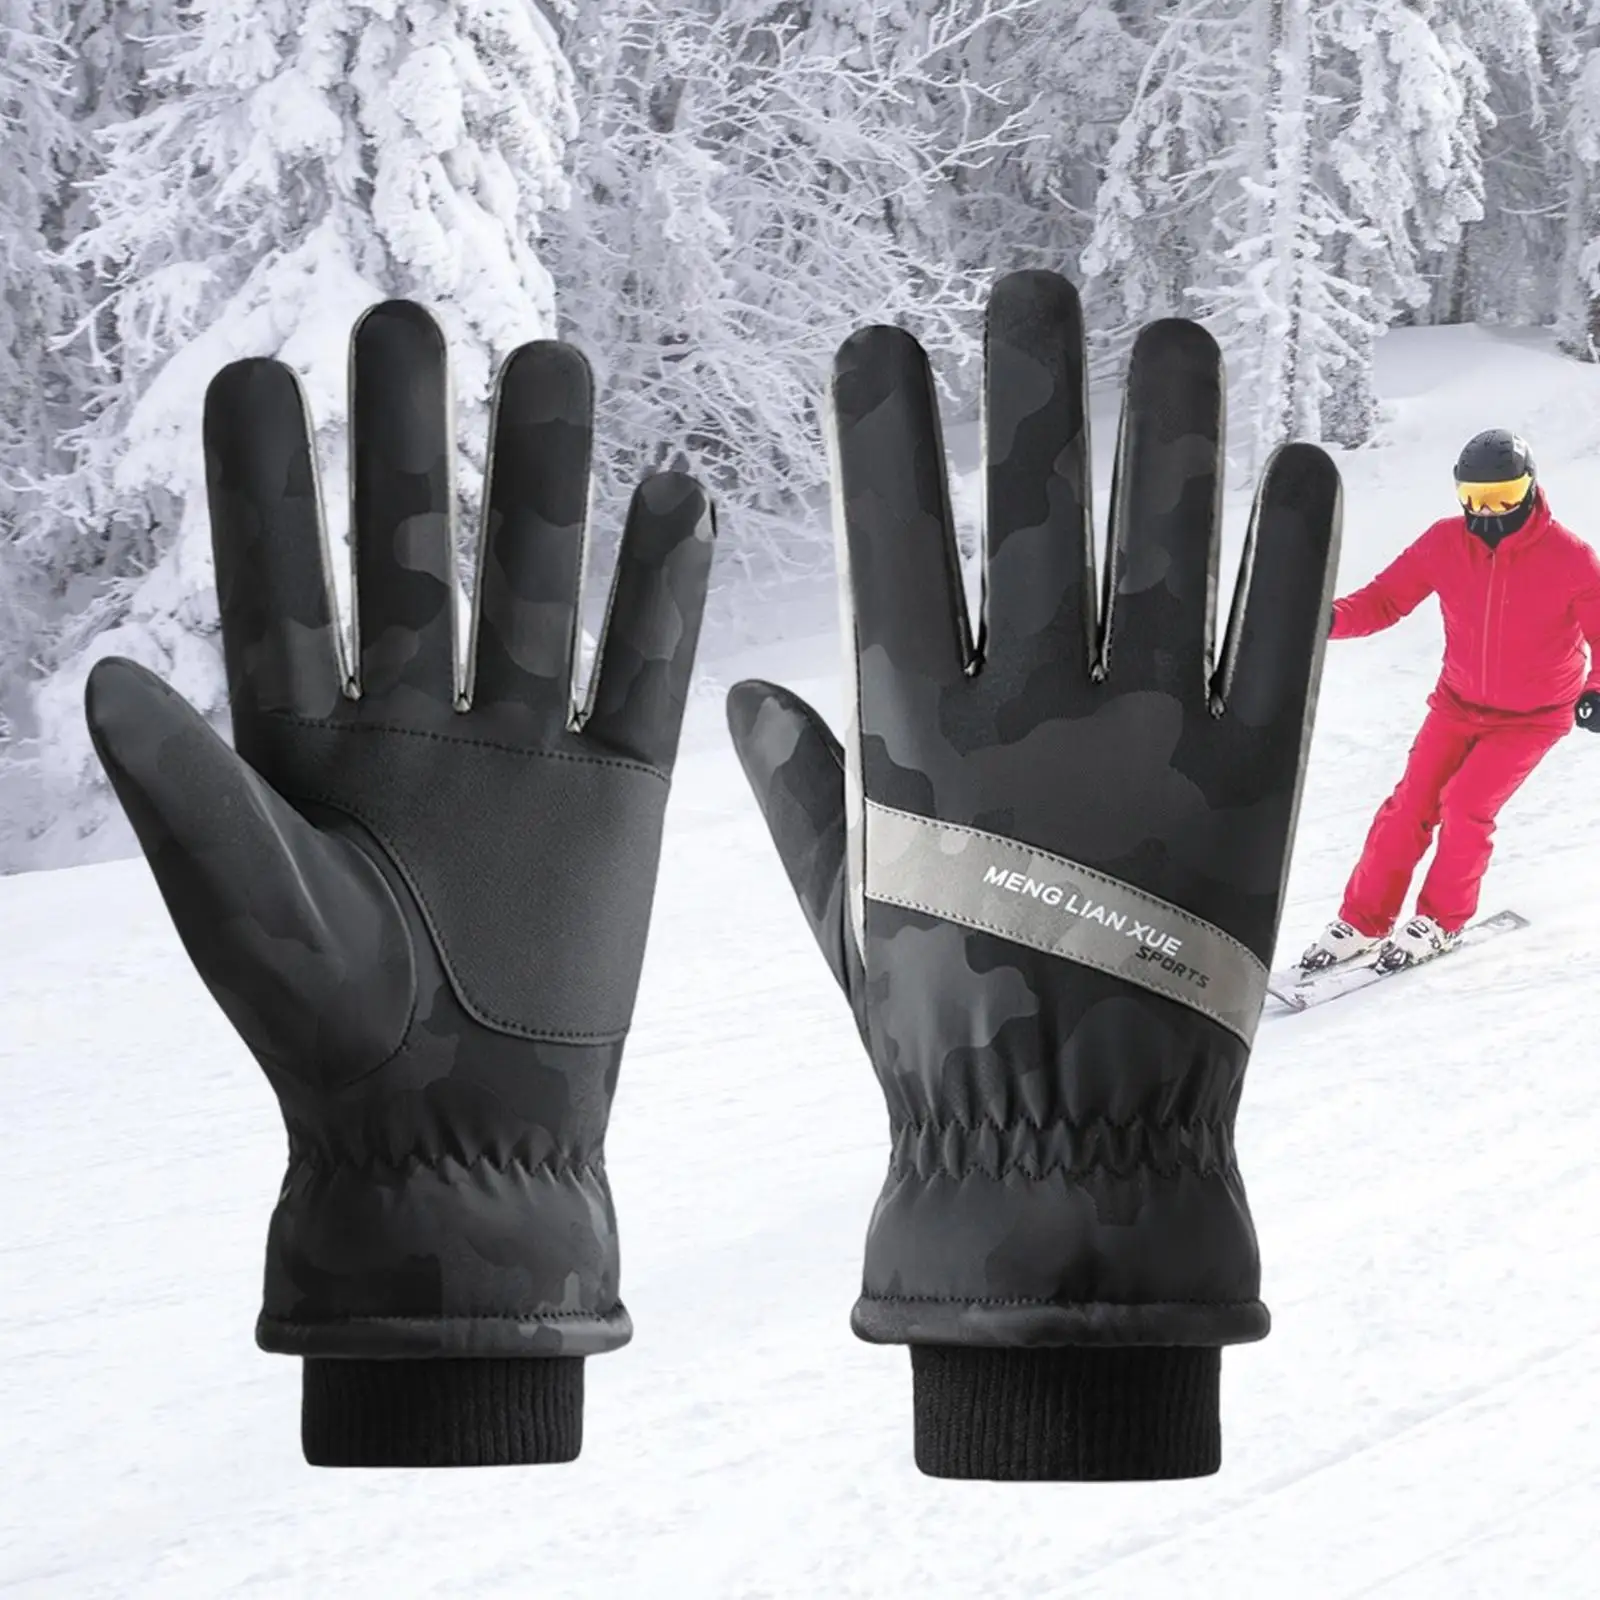 Winter Gloves Touchscreen Lightweight Anti Slip Plush Lined Windproof Ski Gloves for Outdoor Riding Sports Gloves Cycling Skiing